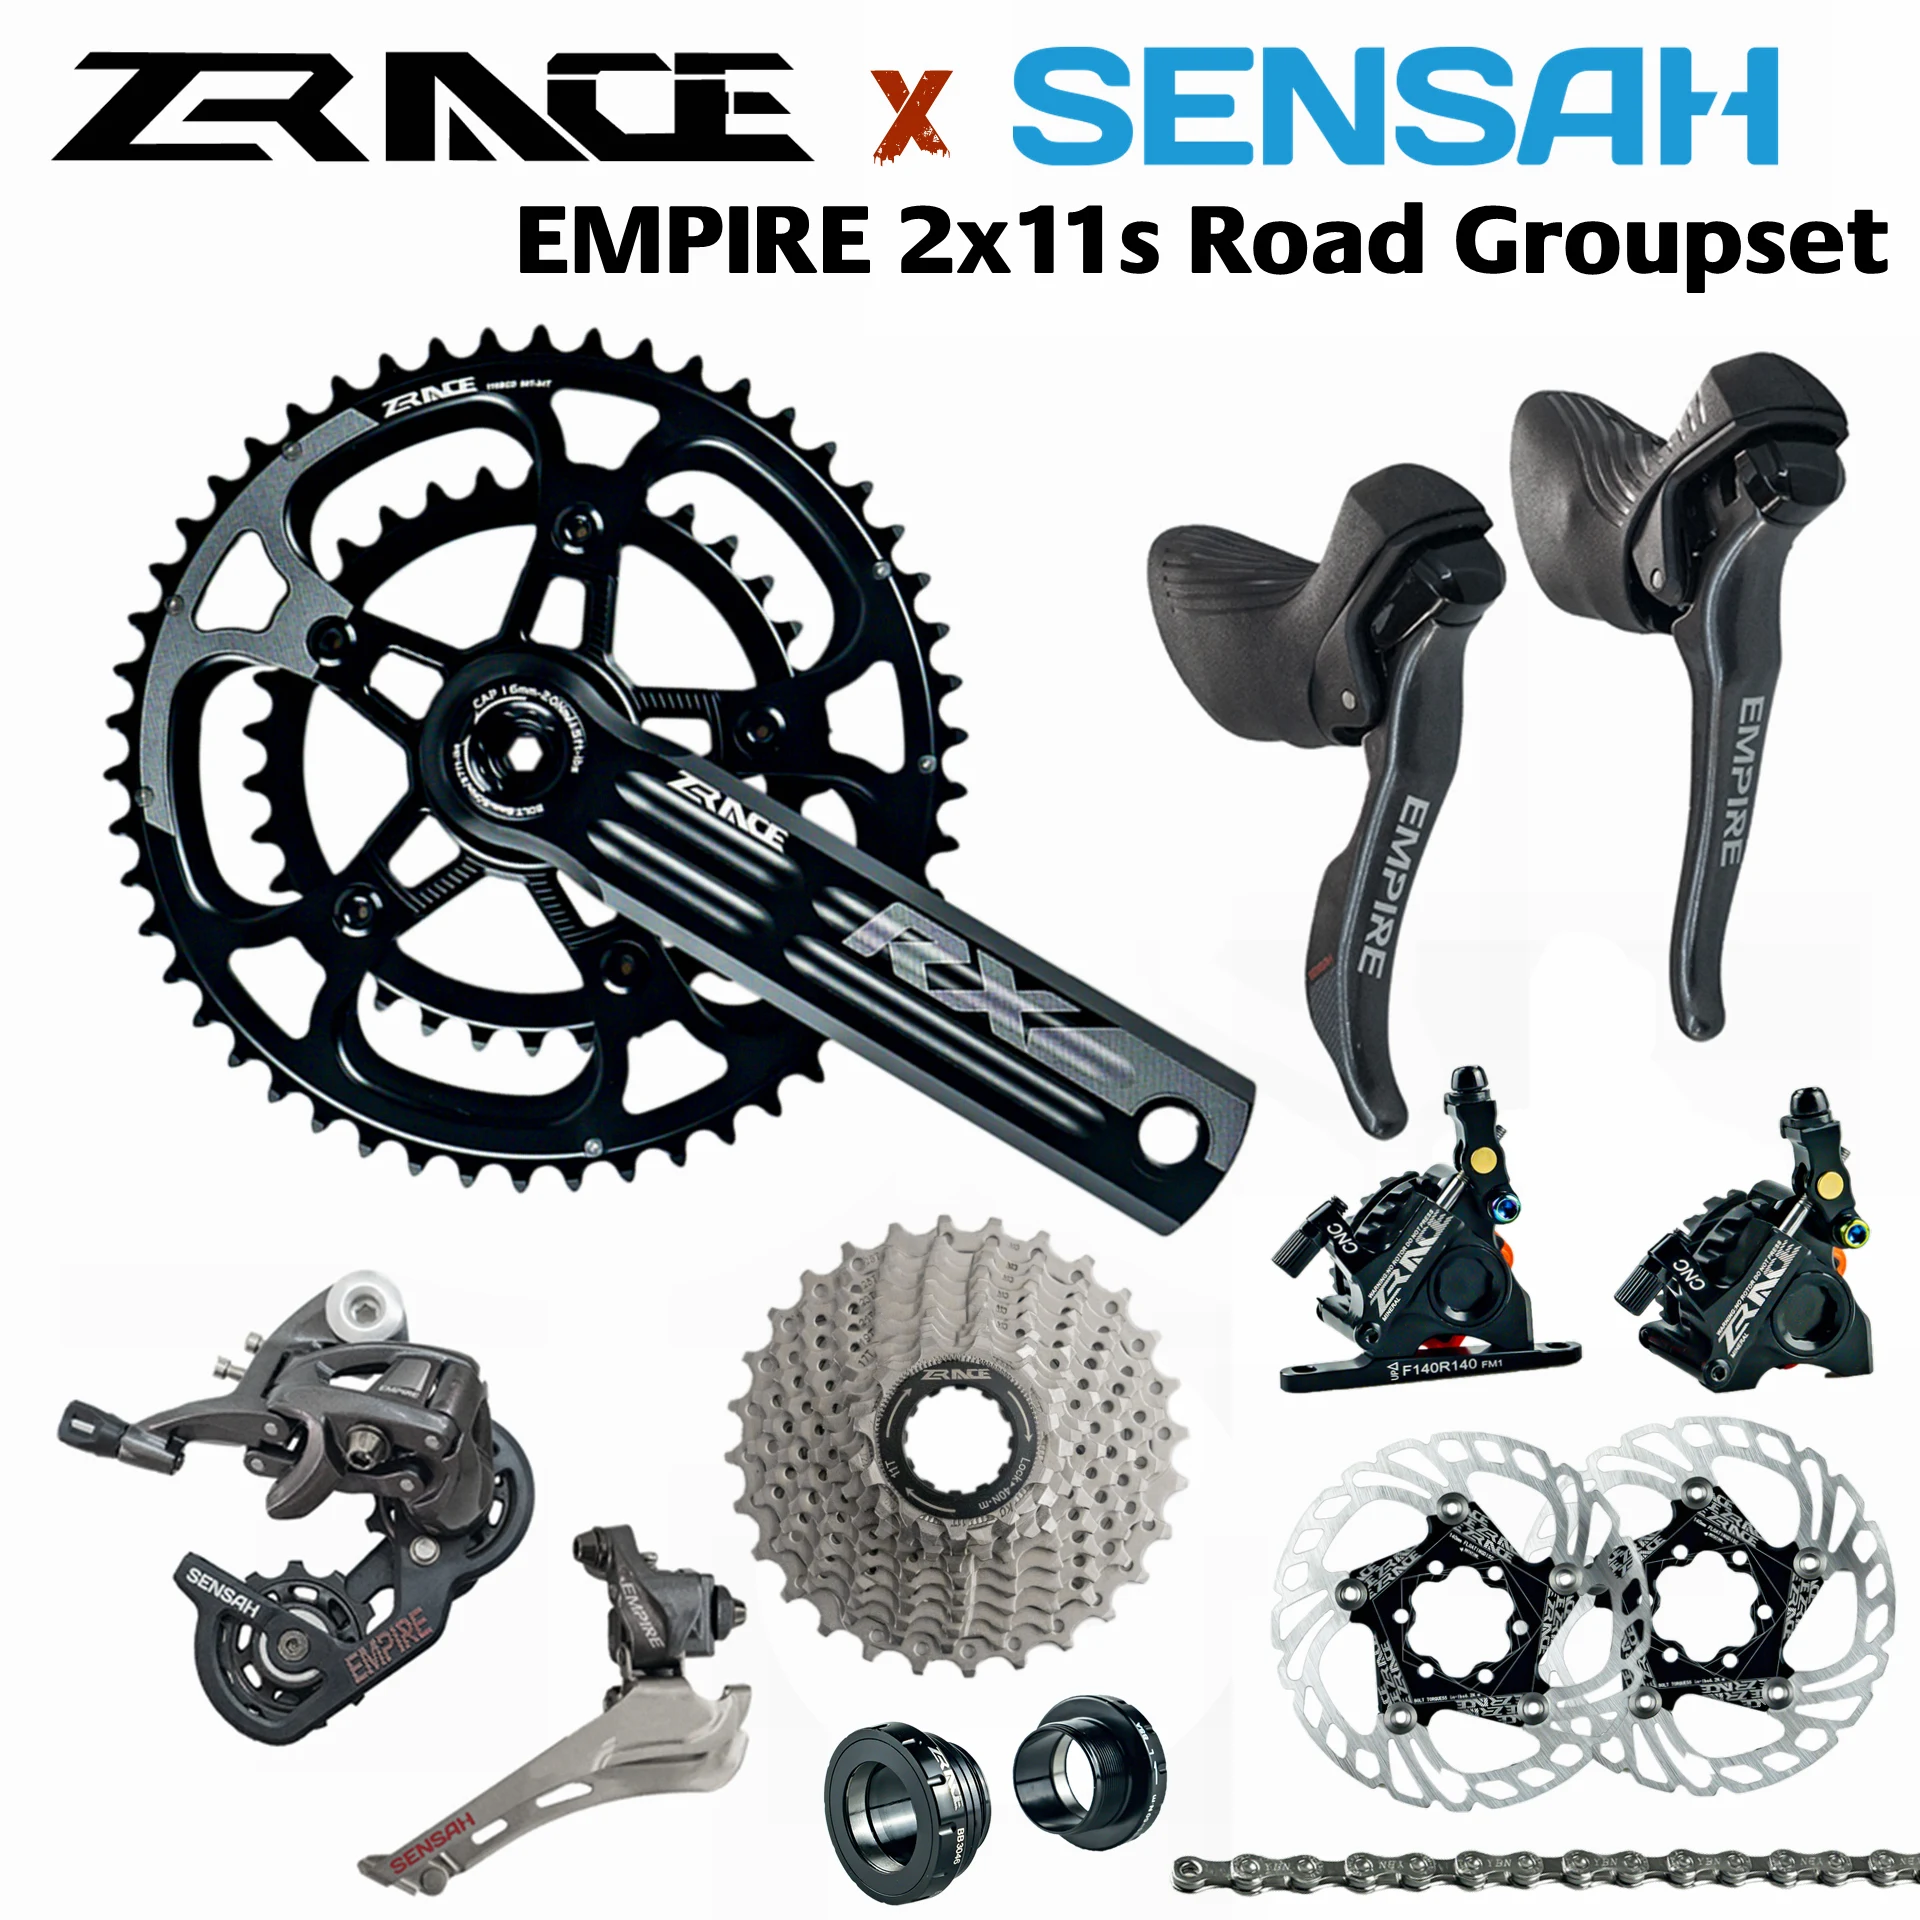 

SENSAH EMPIRE + ZRACE Crank Hydraulic Disc Brake Cassette Chain 2x11 Speed, 22s Road Groupset, for Road bike Bicycle 5800, R7000